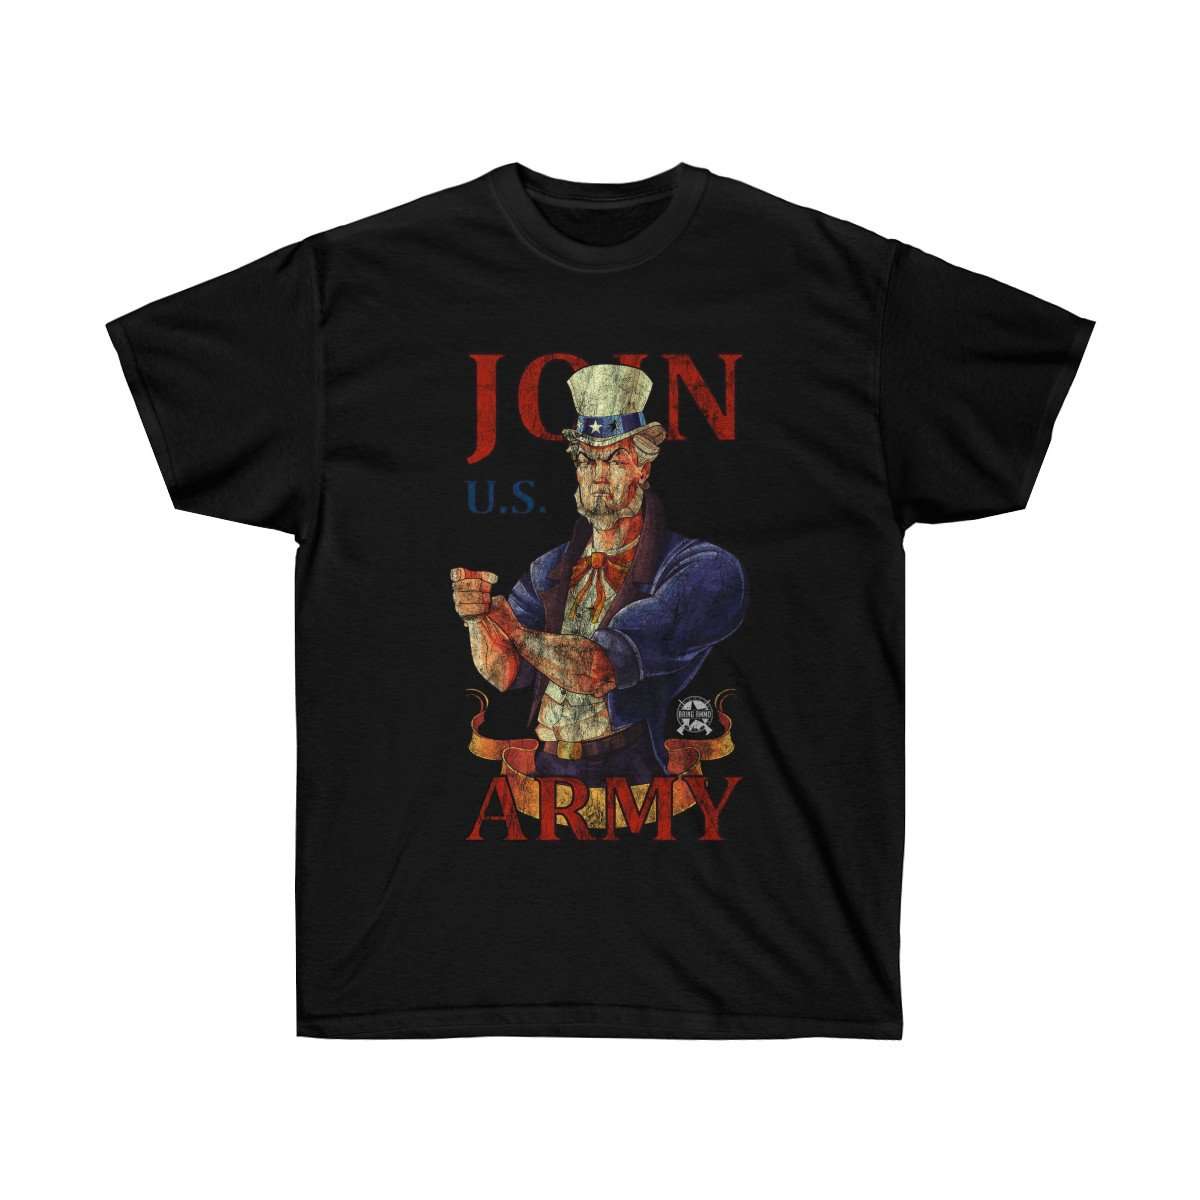 Join U.S. Army Vintage Distressed T-Shirt T-Shirt Black S 